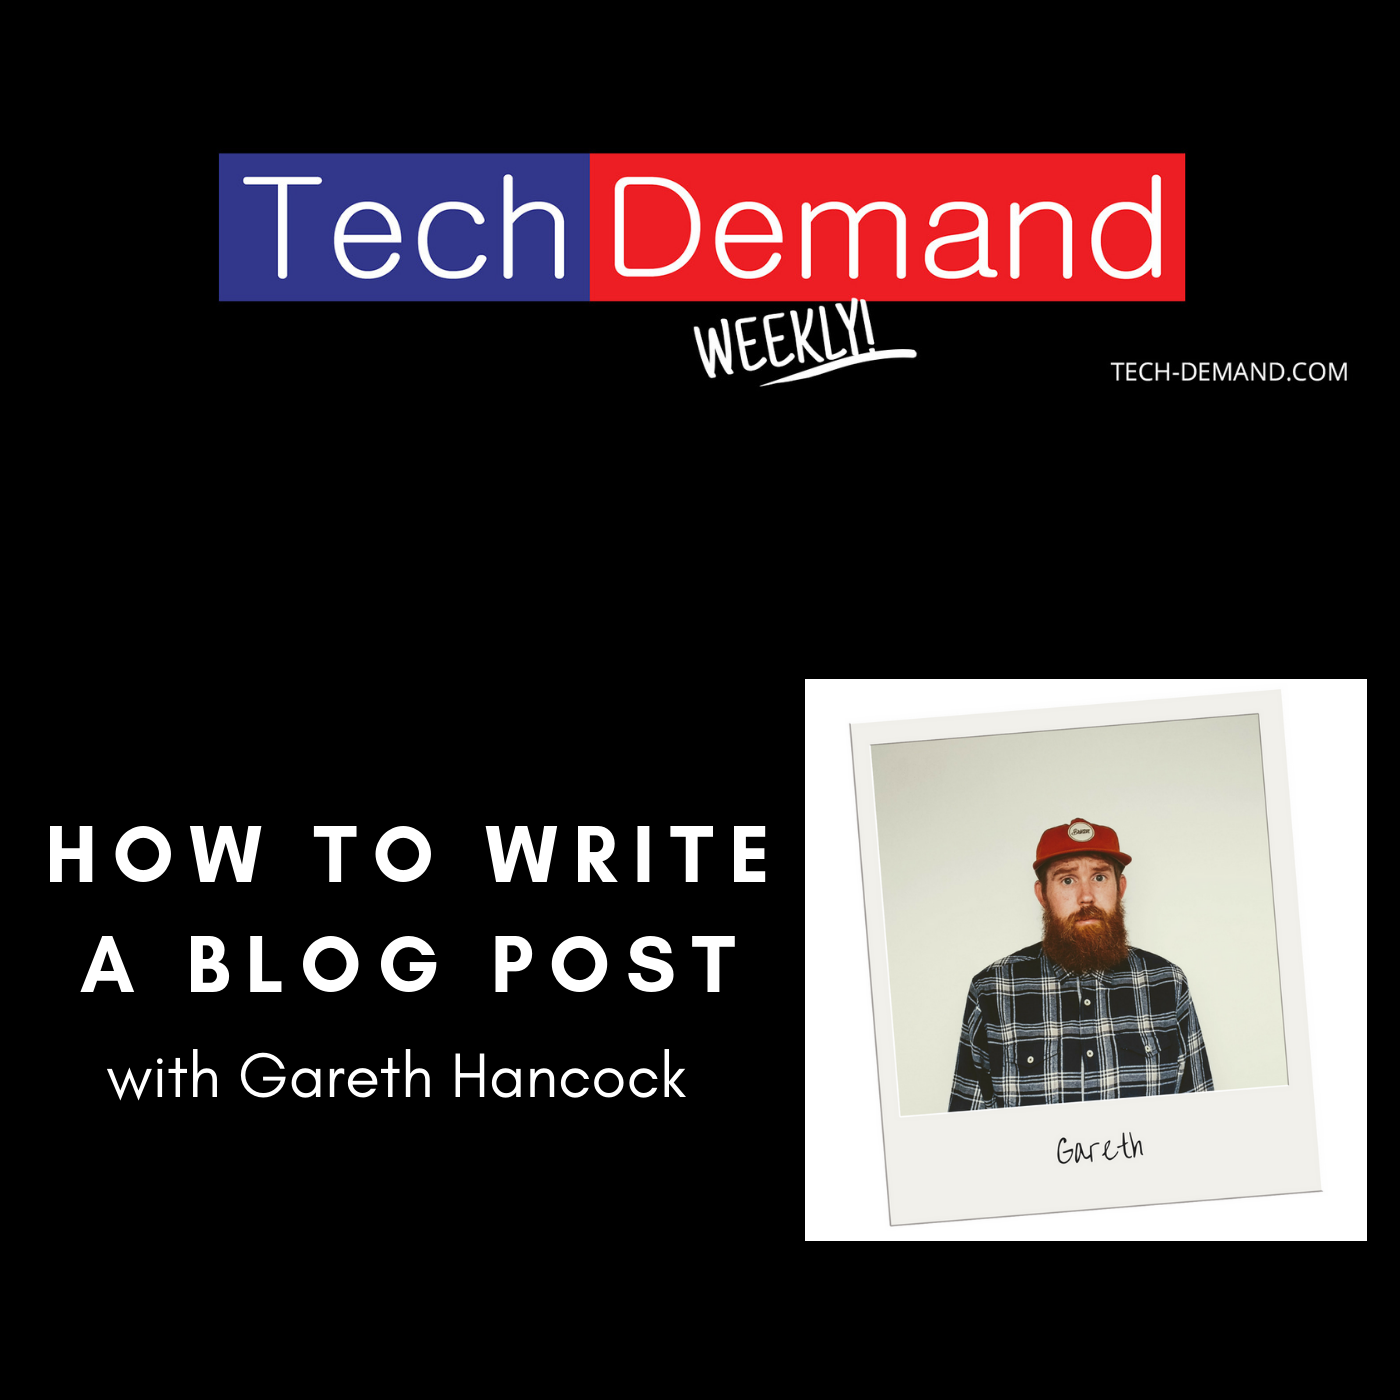 How to write a blog post episode artwork. Tech Demand Weekly logo at the top with picture of Gareth Hancock in bottom right